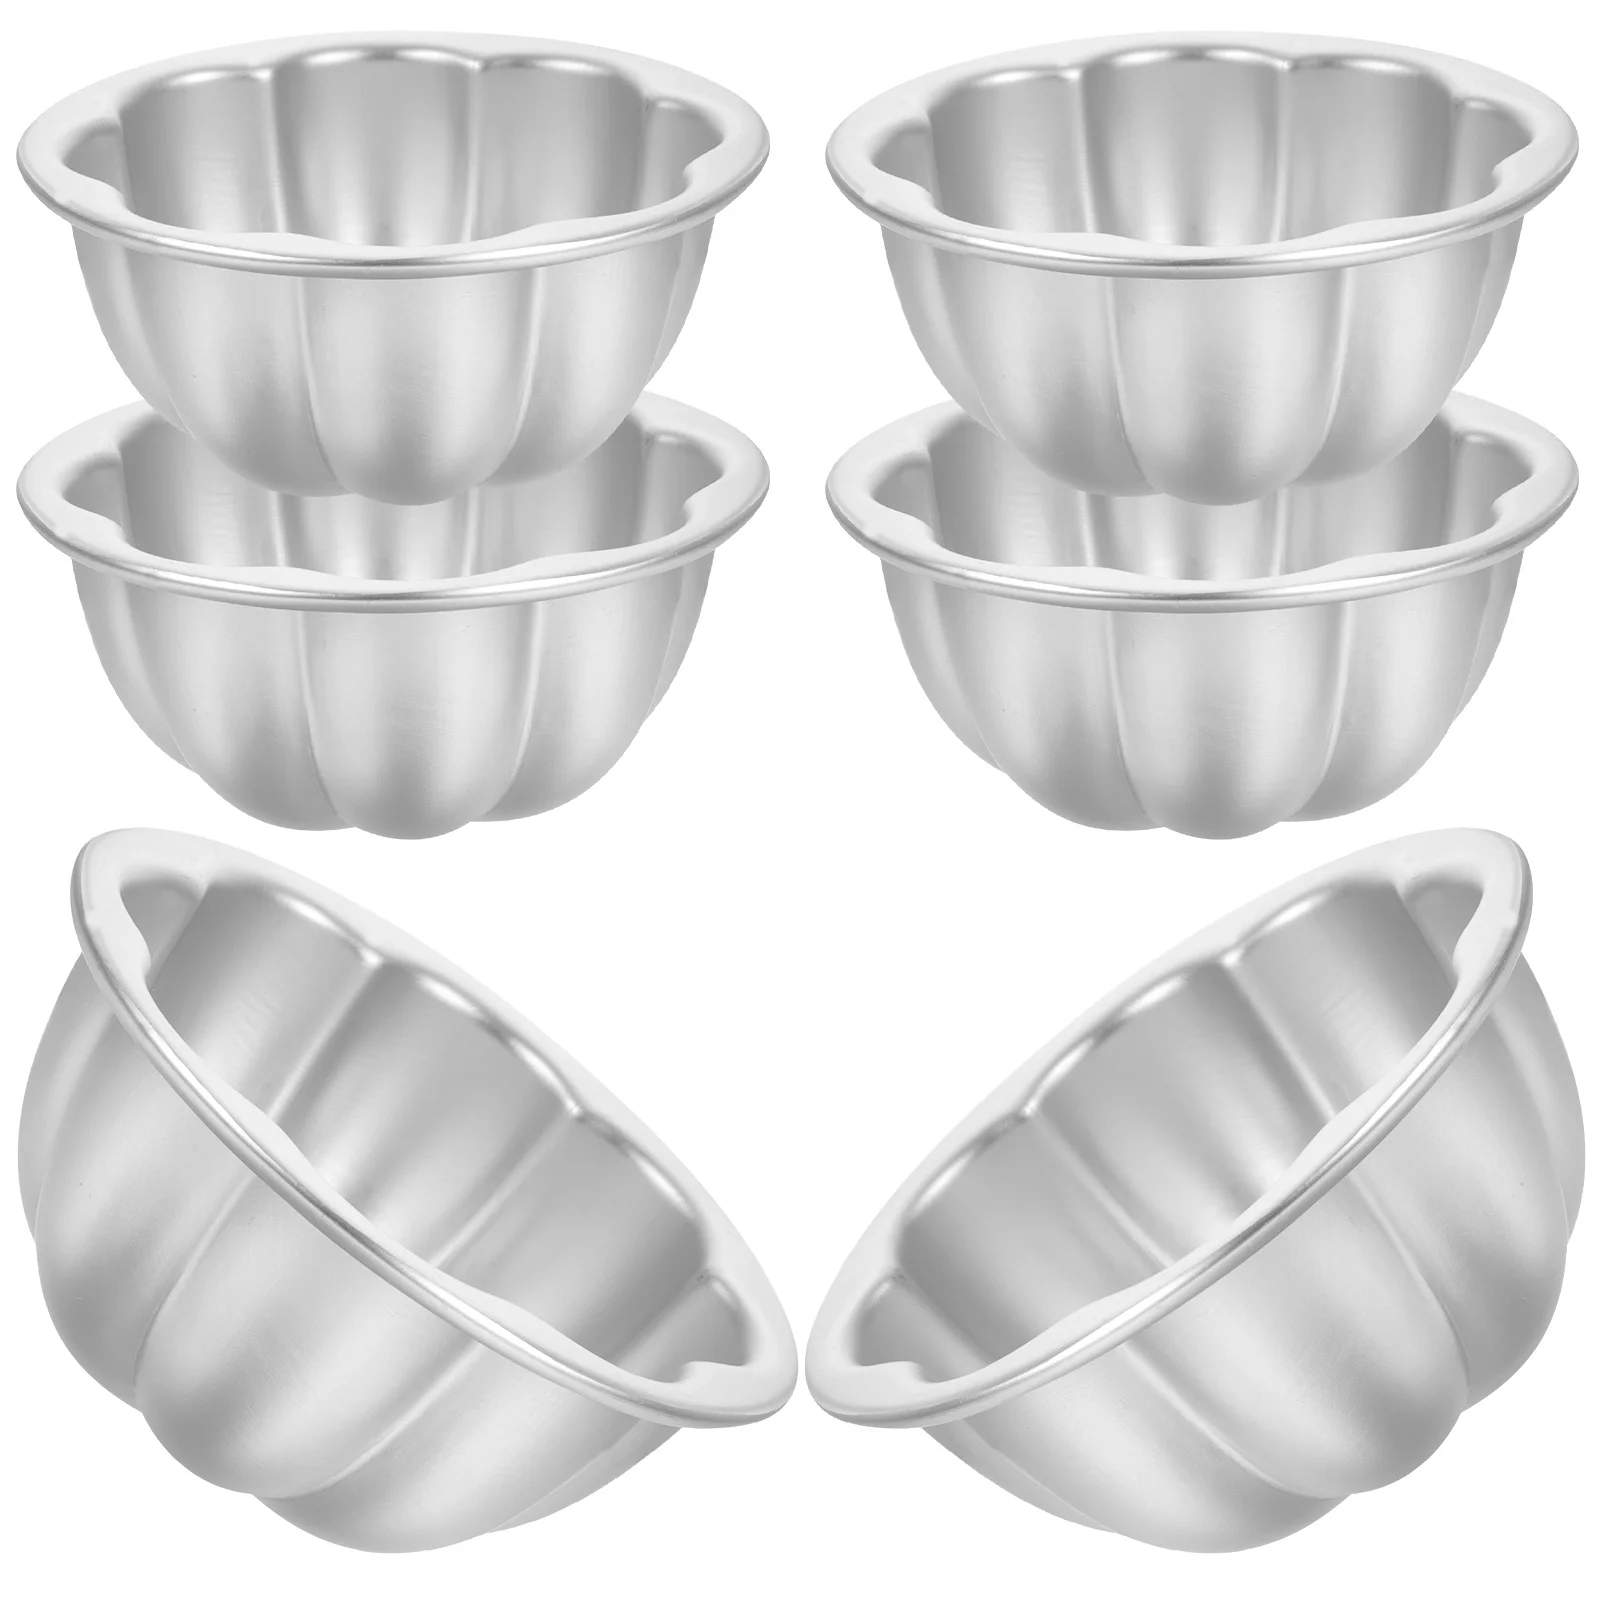 

Baking Mini Molds Cupcake Tart Pan Muffin Mold Cake Egg Tins Pudding Cup Cups Pans Silicone Cakes Stencils Tools Bakeware